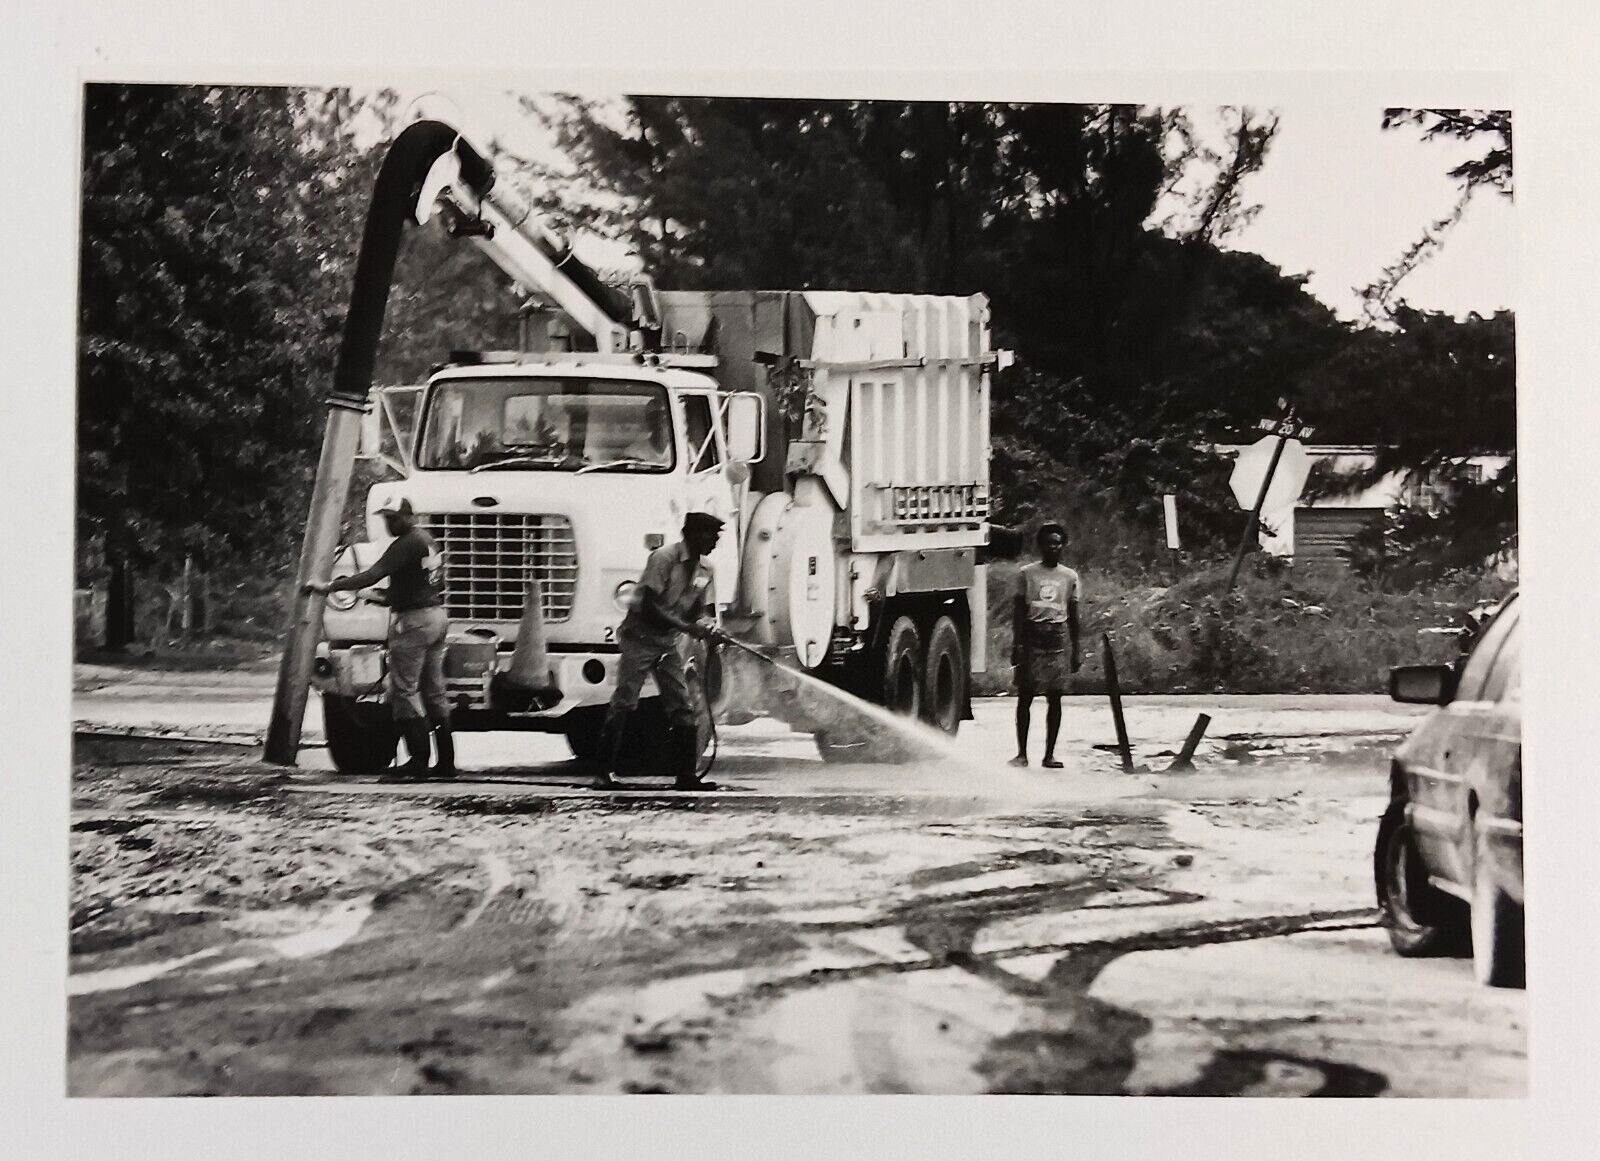 1989 Fort Lauderdale Florida Sewage Clean Up NW 20th Ave Workers VTG Press Photo